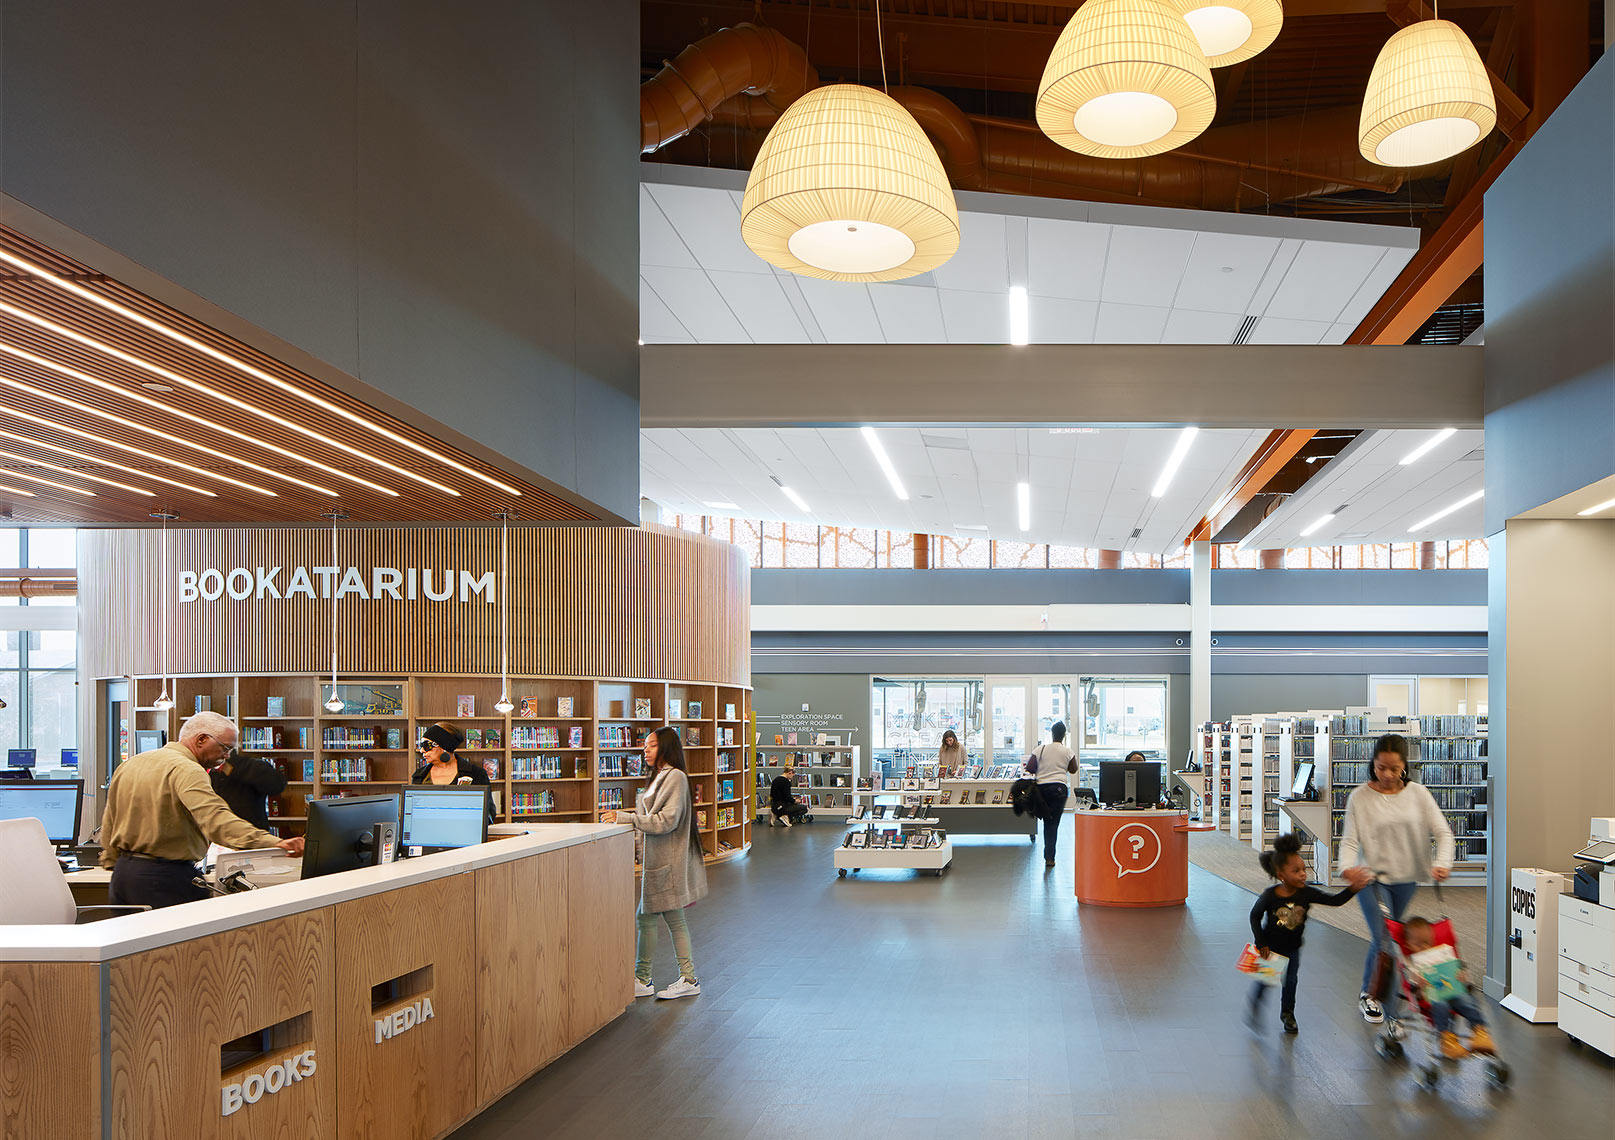 Route-9-Library--Innovation-Center-0478